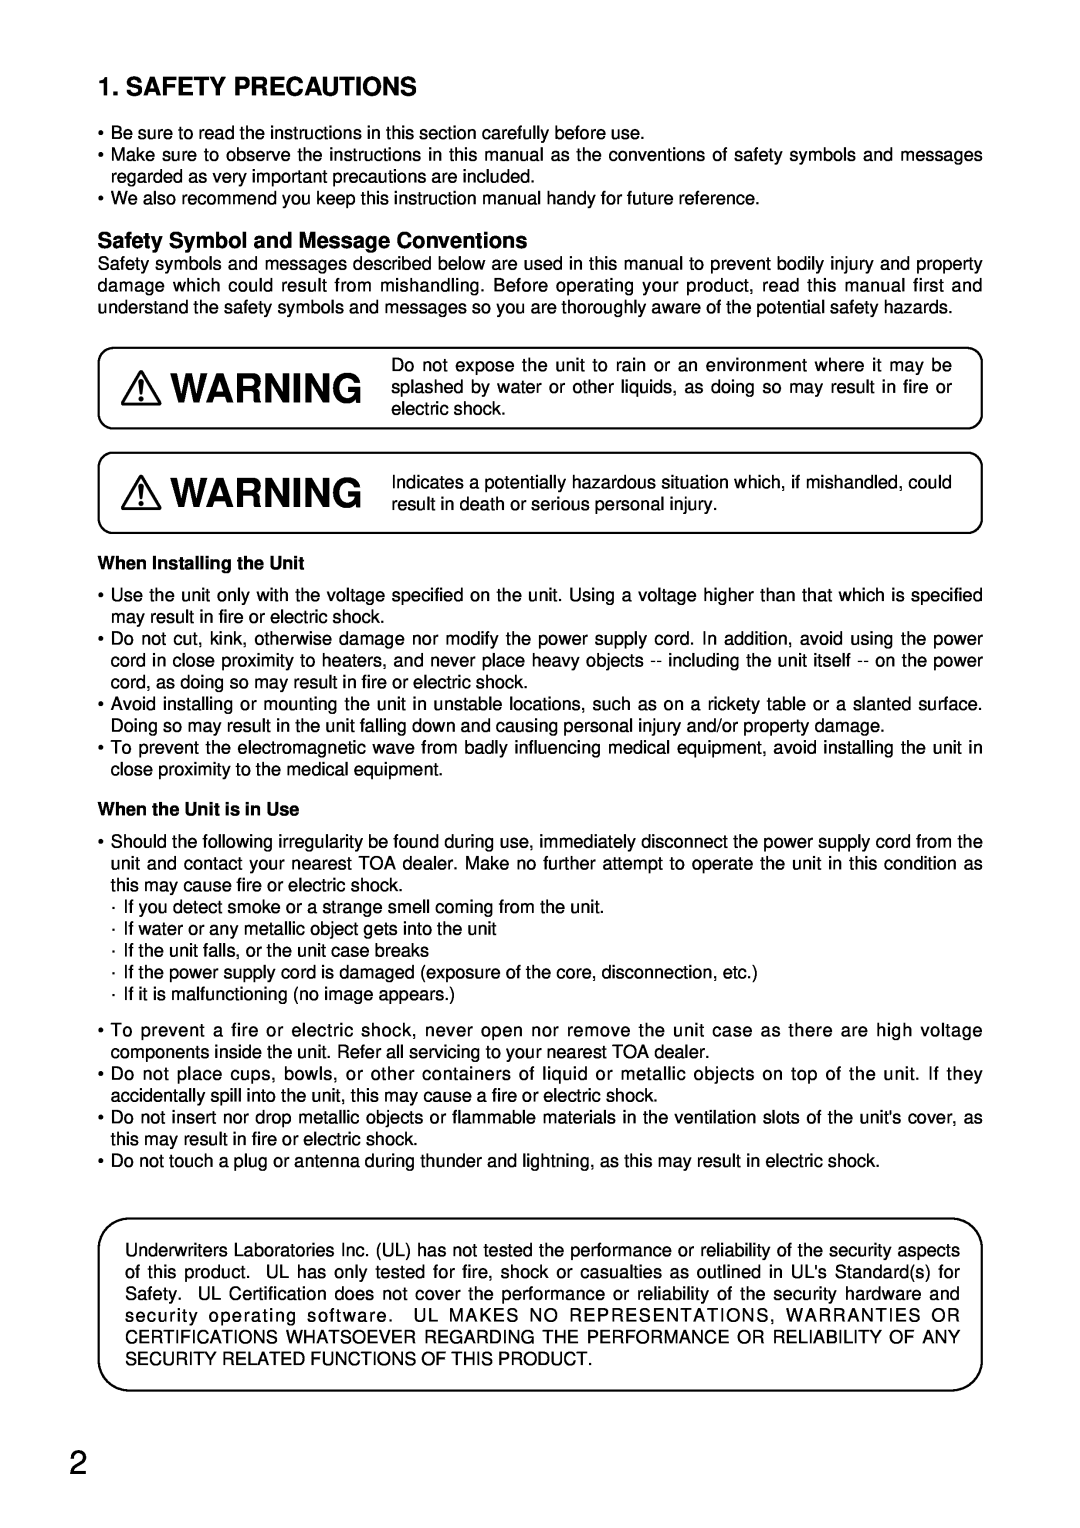 TOA Electronics C-IF500 instruction manual Safety Precautions, Safety Symbol and Message Conventions 